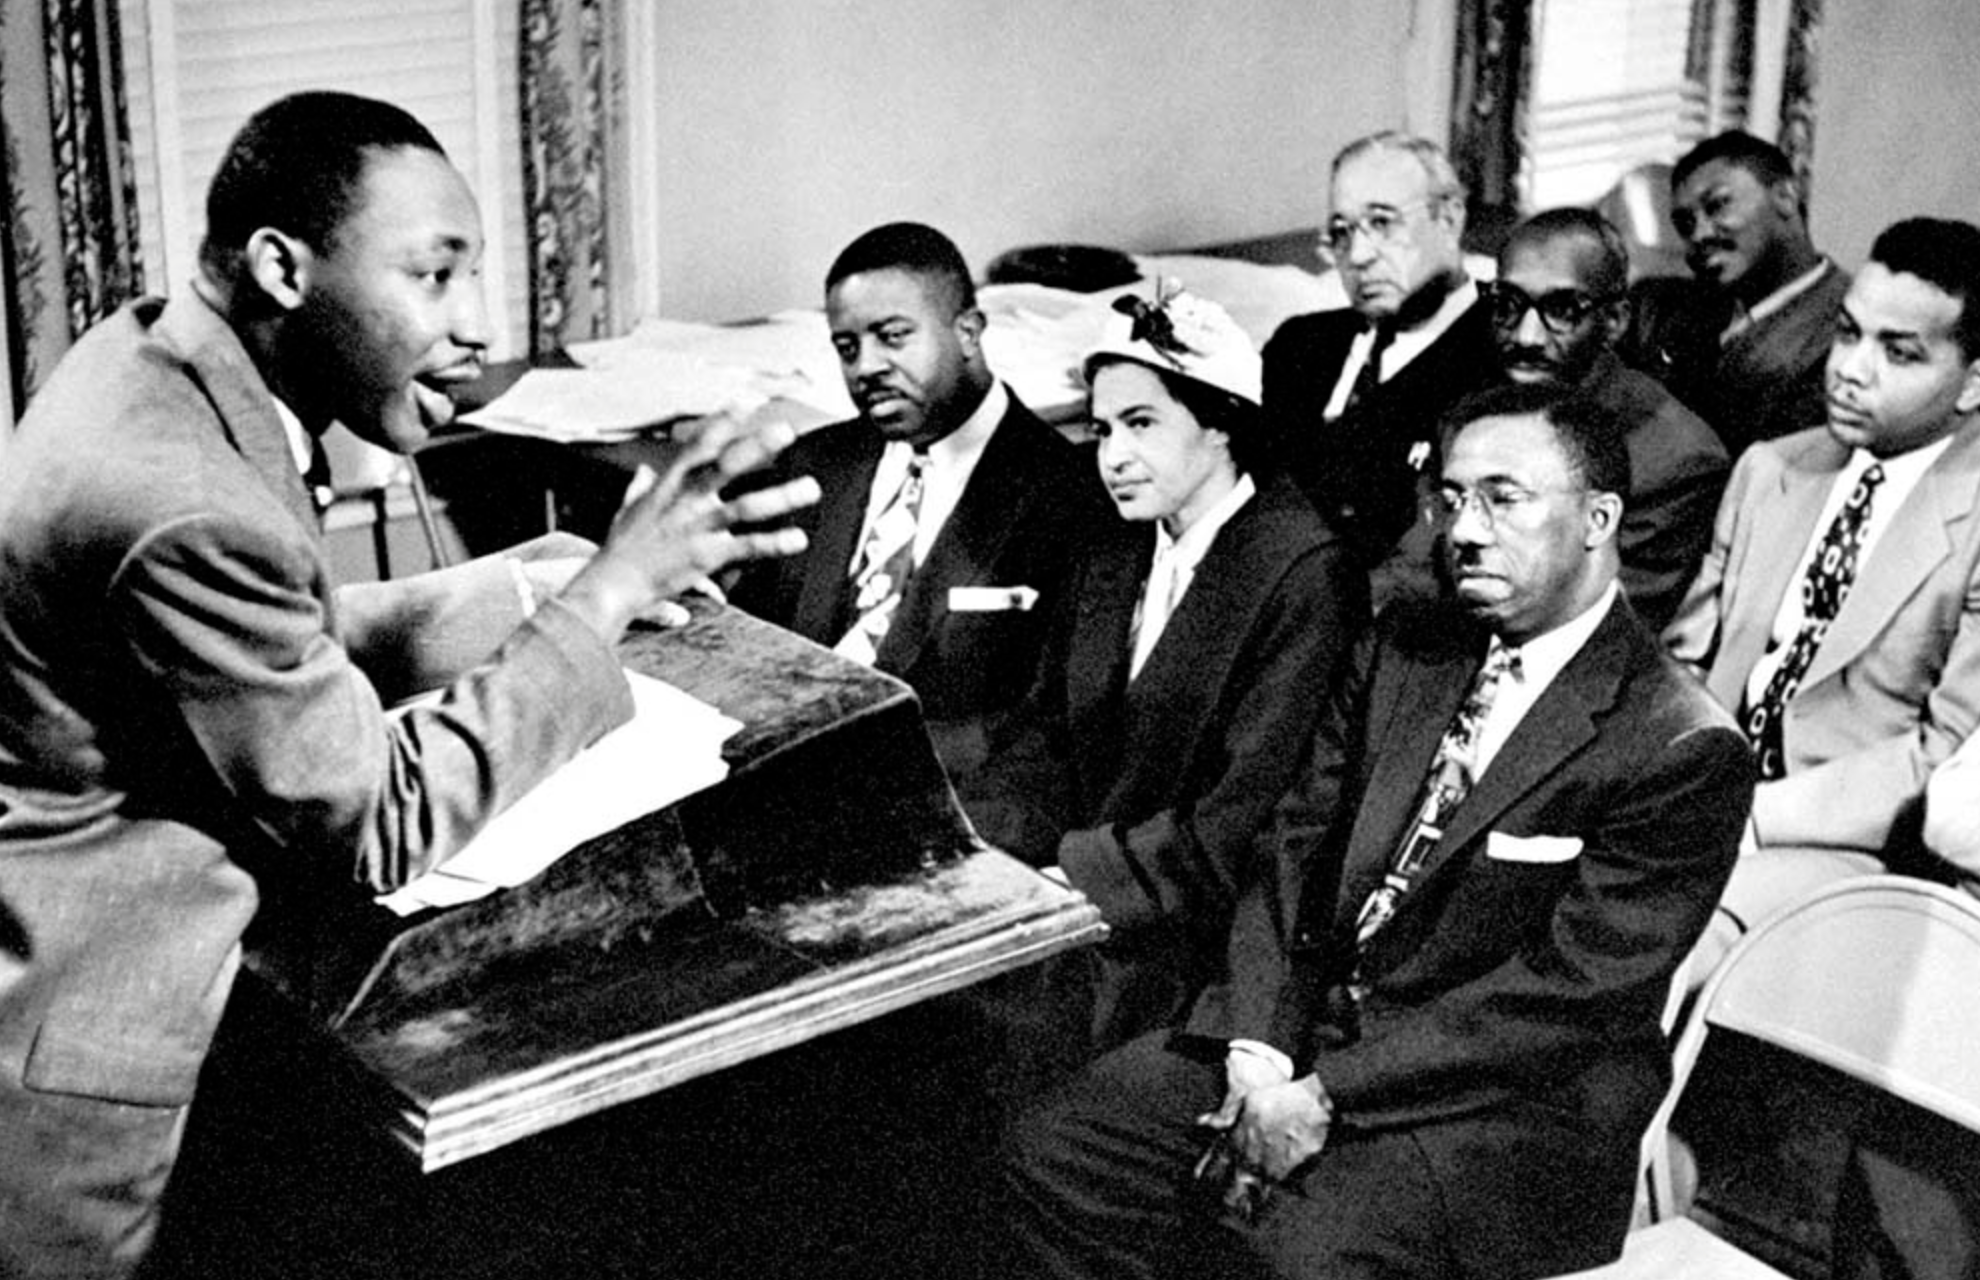 Featuring famous members like Rosa Parks, Martin Luther King Jr. and Coretta Scott King, the Montgomery Improvement Association (MIA) played a critical role in the Civil Rights movement during the 1960s. Determined “to improve race relations, and to uplift the general tenor of the community,” the group is credited with bringing widespread attention to racial segregation. 